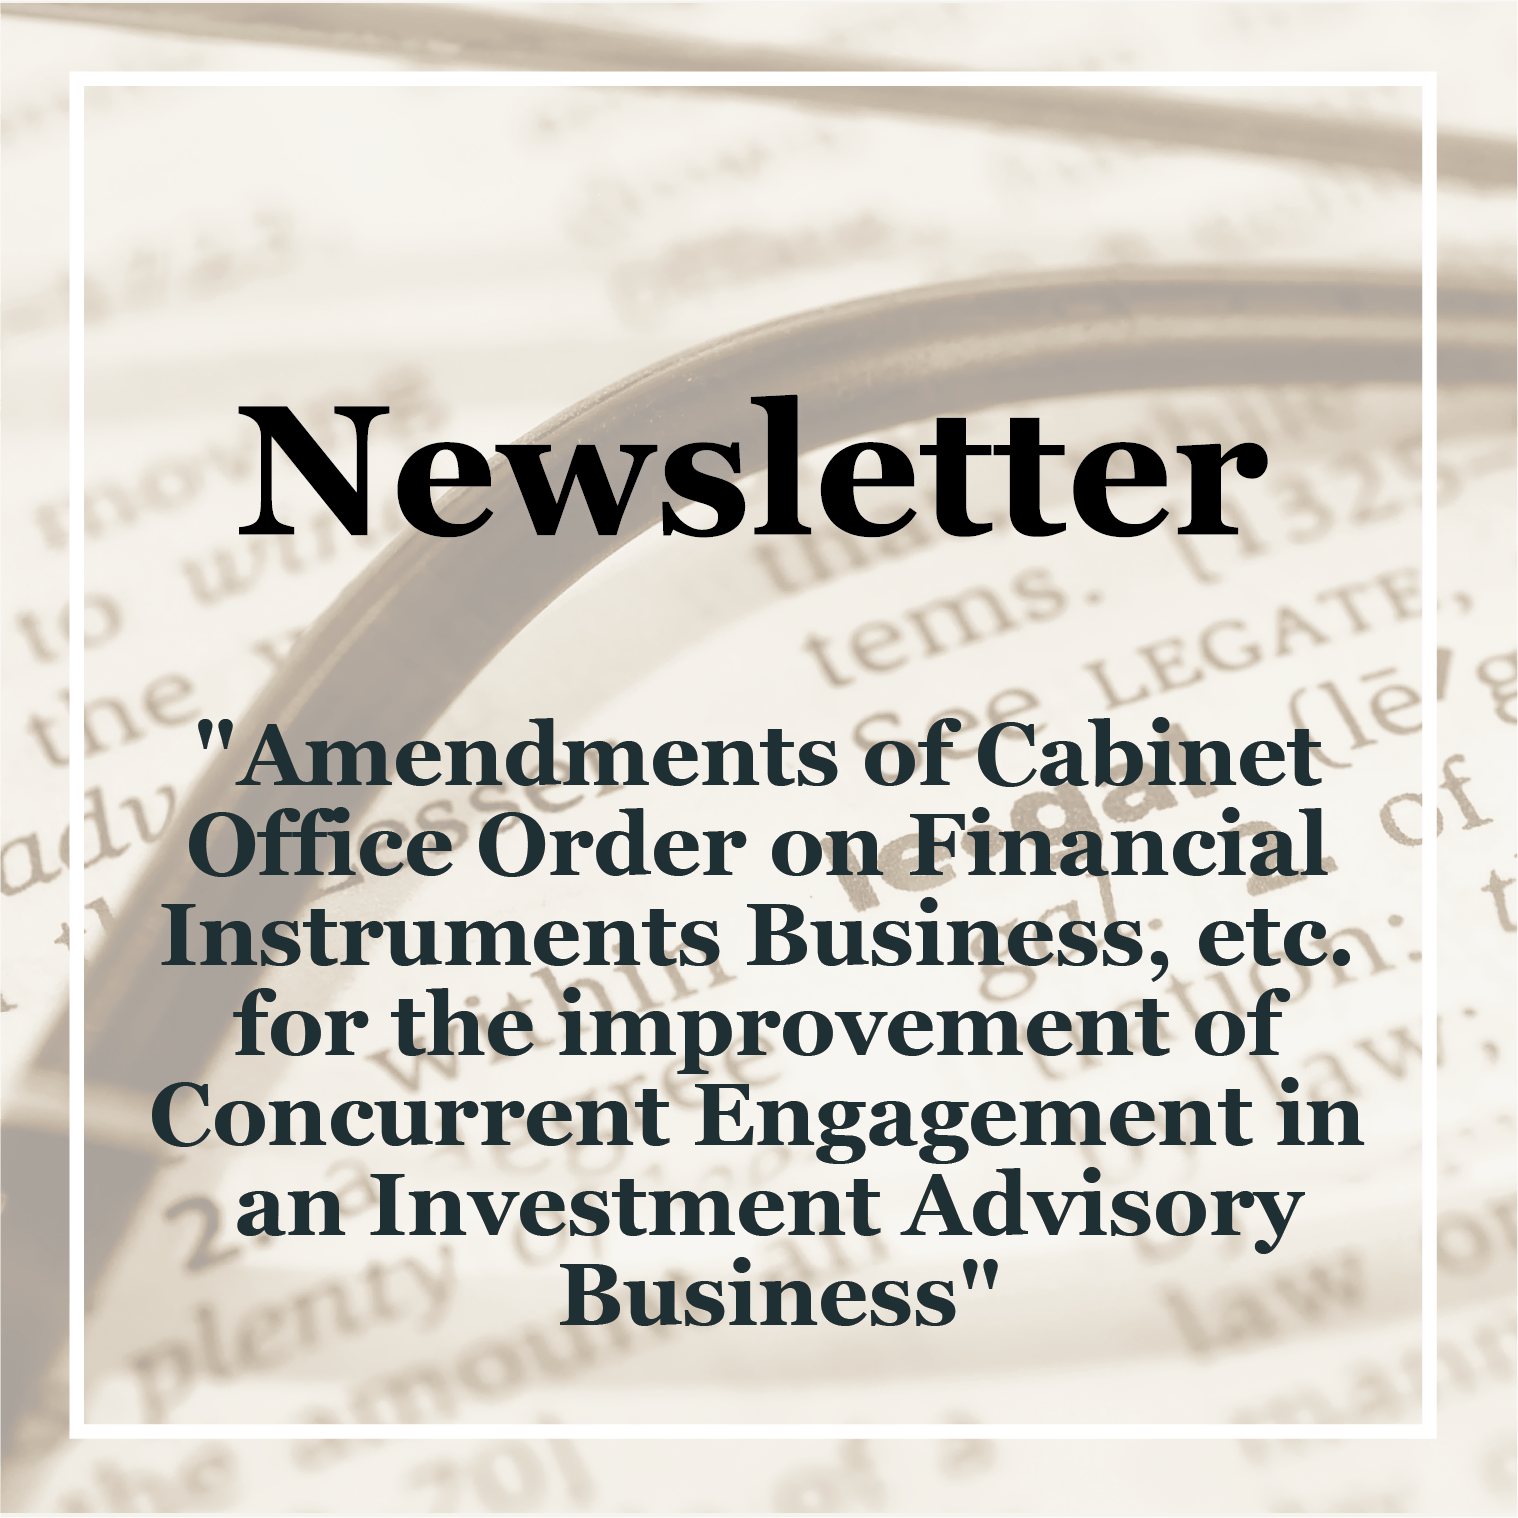 [Newsletter] Policy Research Institute: "Amendments of Cabinet Office Order on Financial Instruments Business, etc. for the improvement of Concurrent Engagement in an Investment Advisory Business"